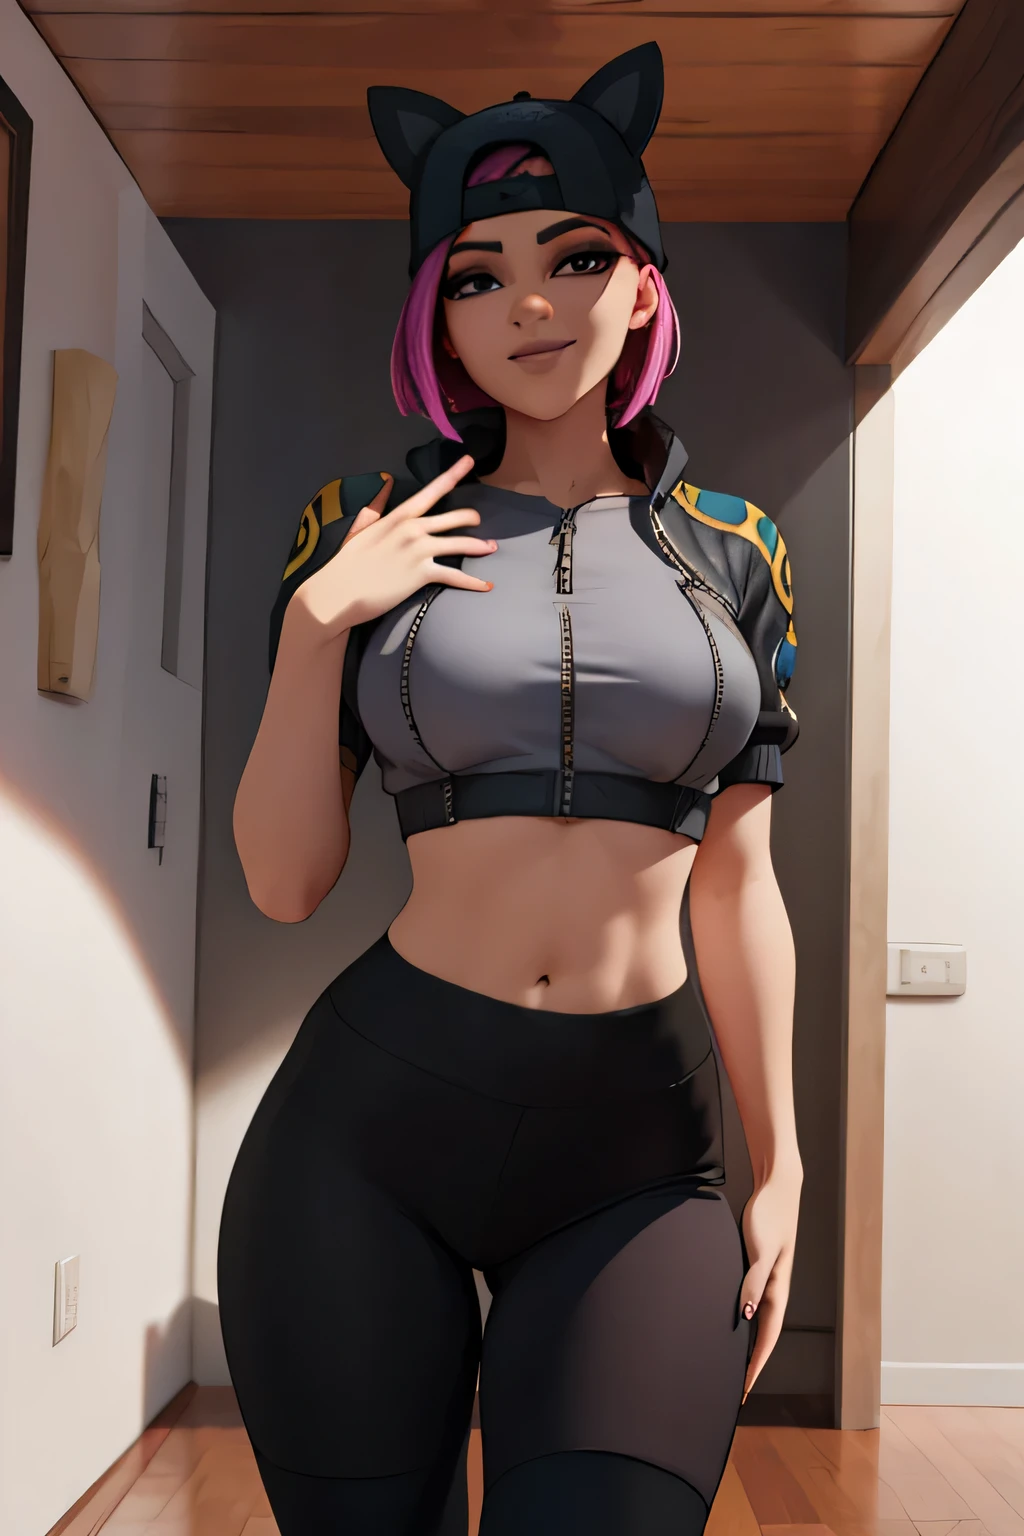 1 girl, (masterpiece), (Best Quality), standing, (Alone), looking at the viewer, high detailed,extremely detailed, fine eyes, smile,dynamic pose, short pink hair,cap,crop top, black jacket,fingerless glove,With curves,forest,Glasses,(black leggings),(portrait:1.2),